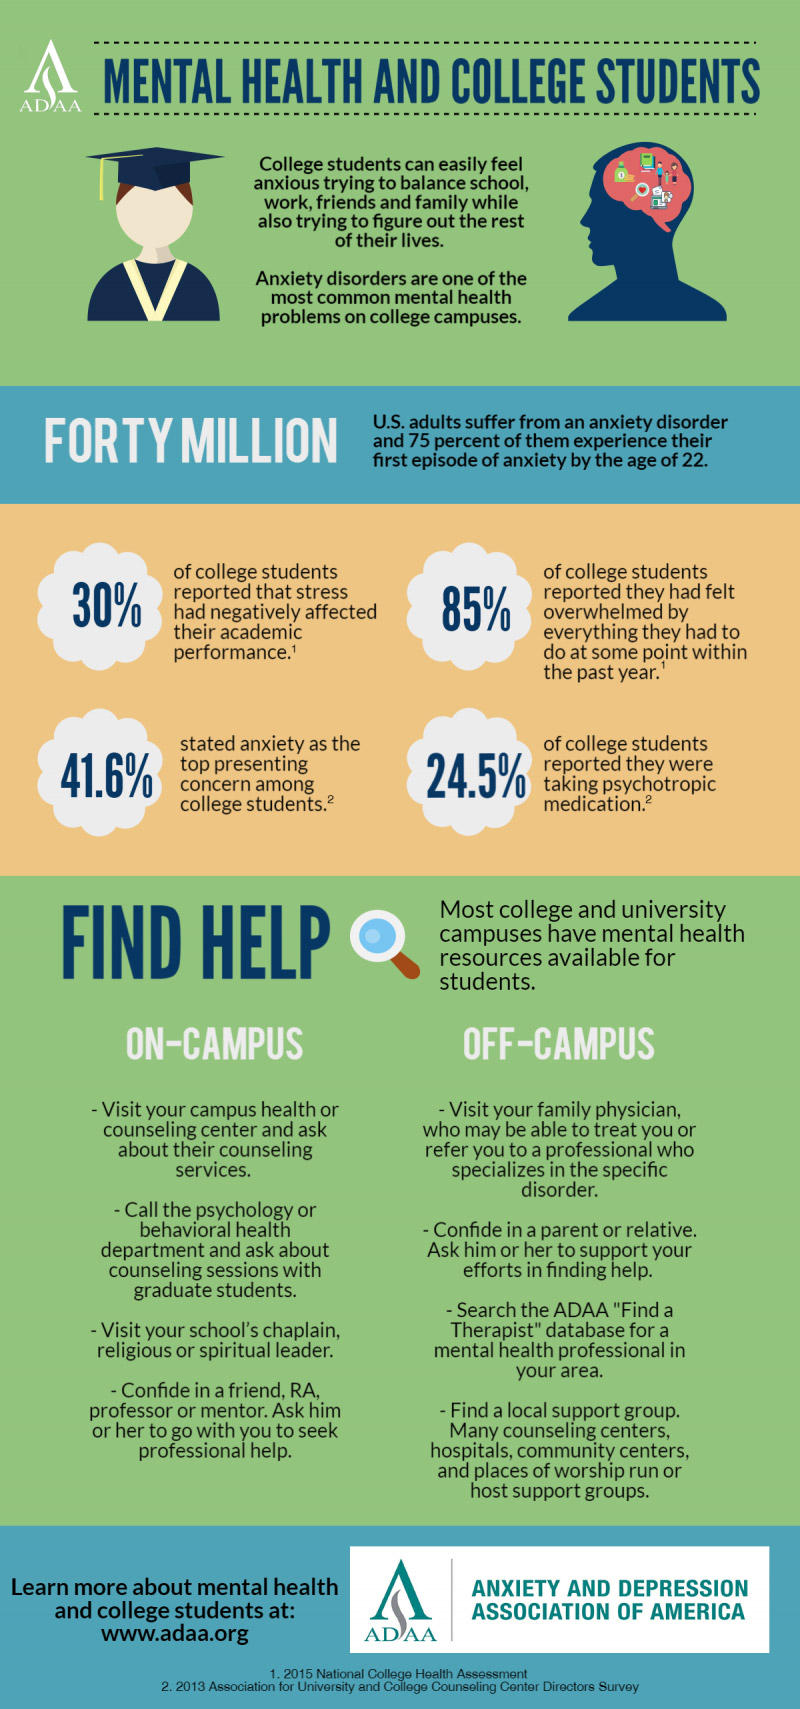 Mental health and college students.